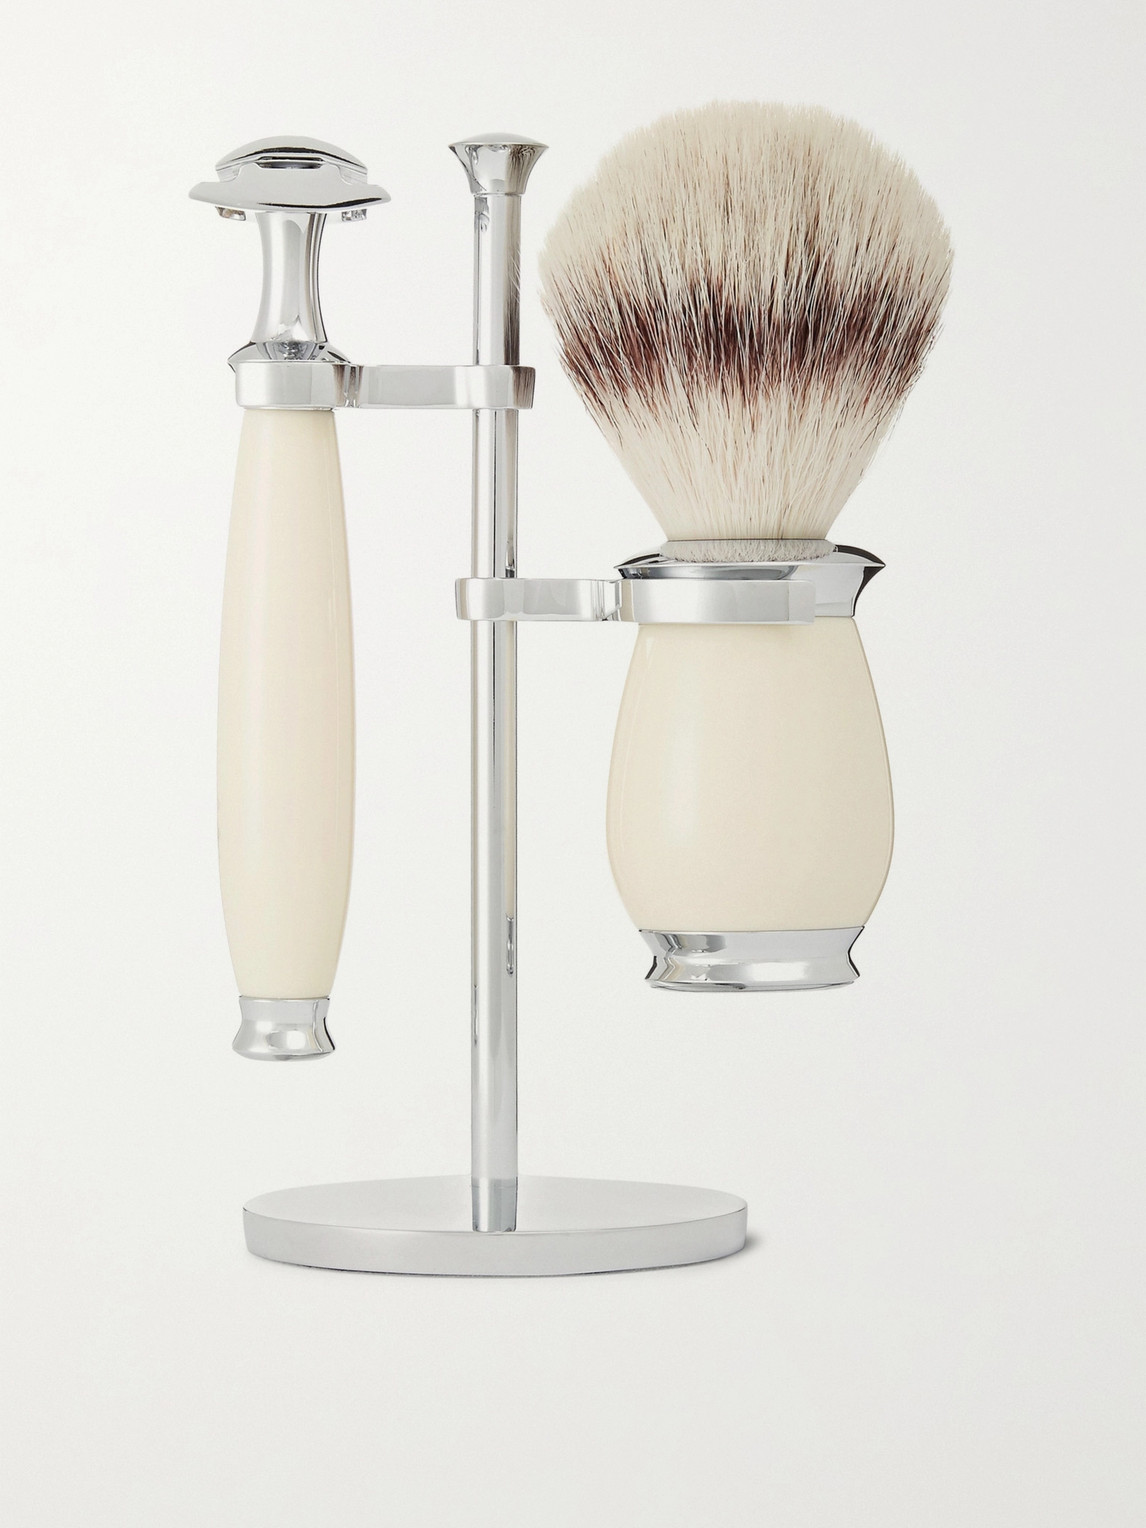 Mühle Purist Three-piece Chrome And Resin Shaving Set In Colorless